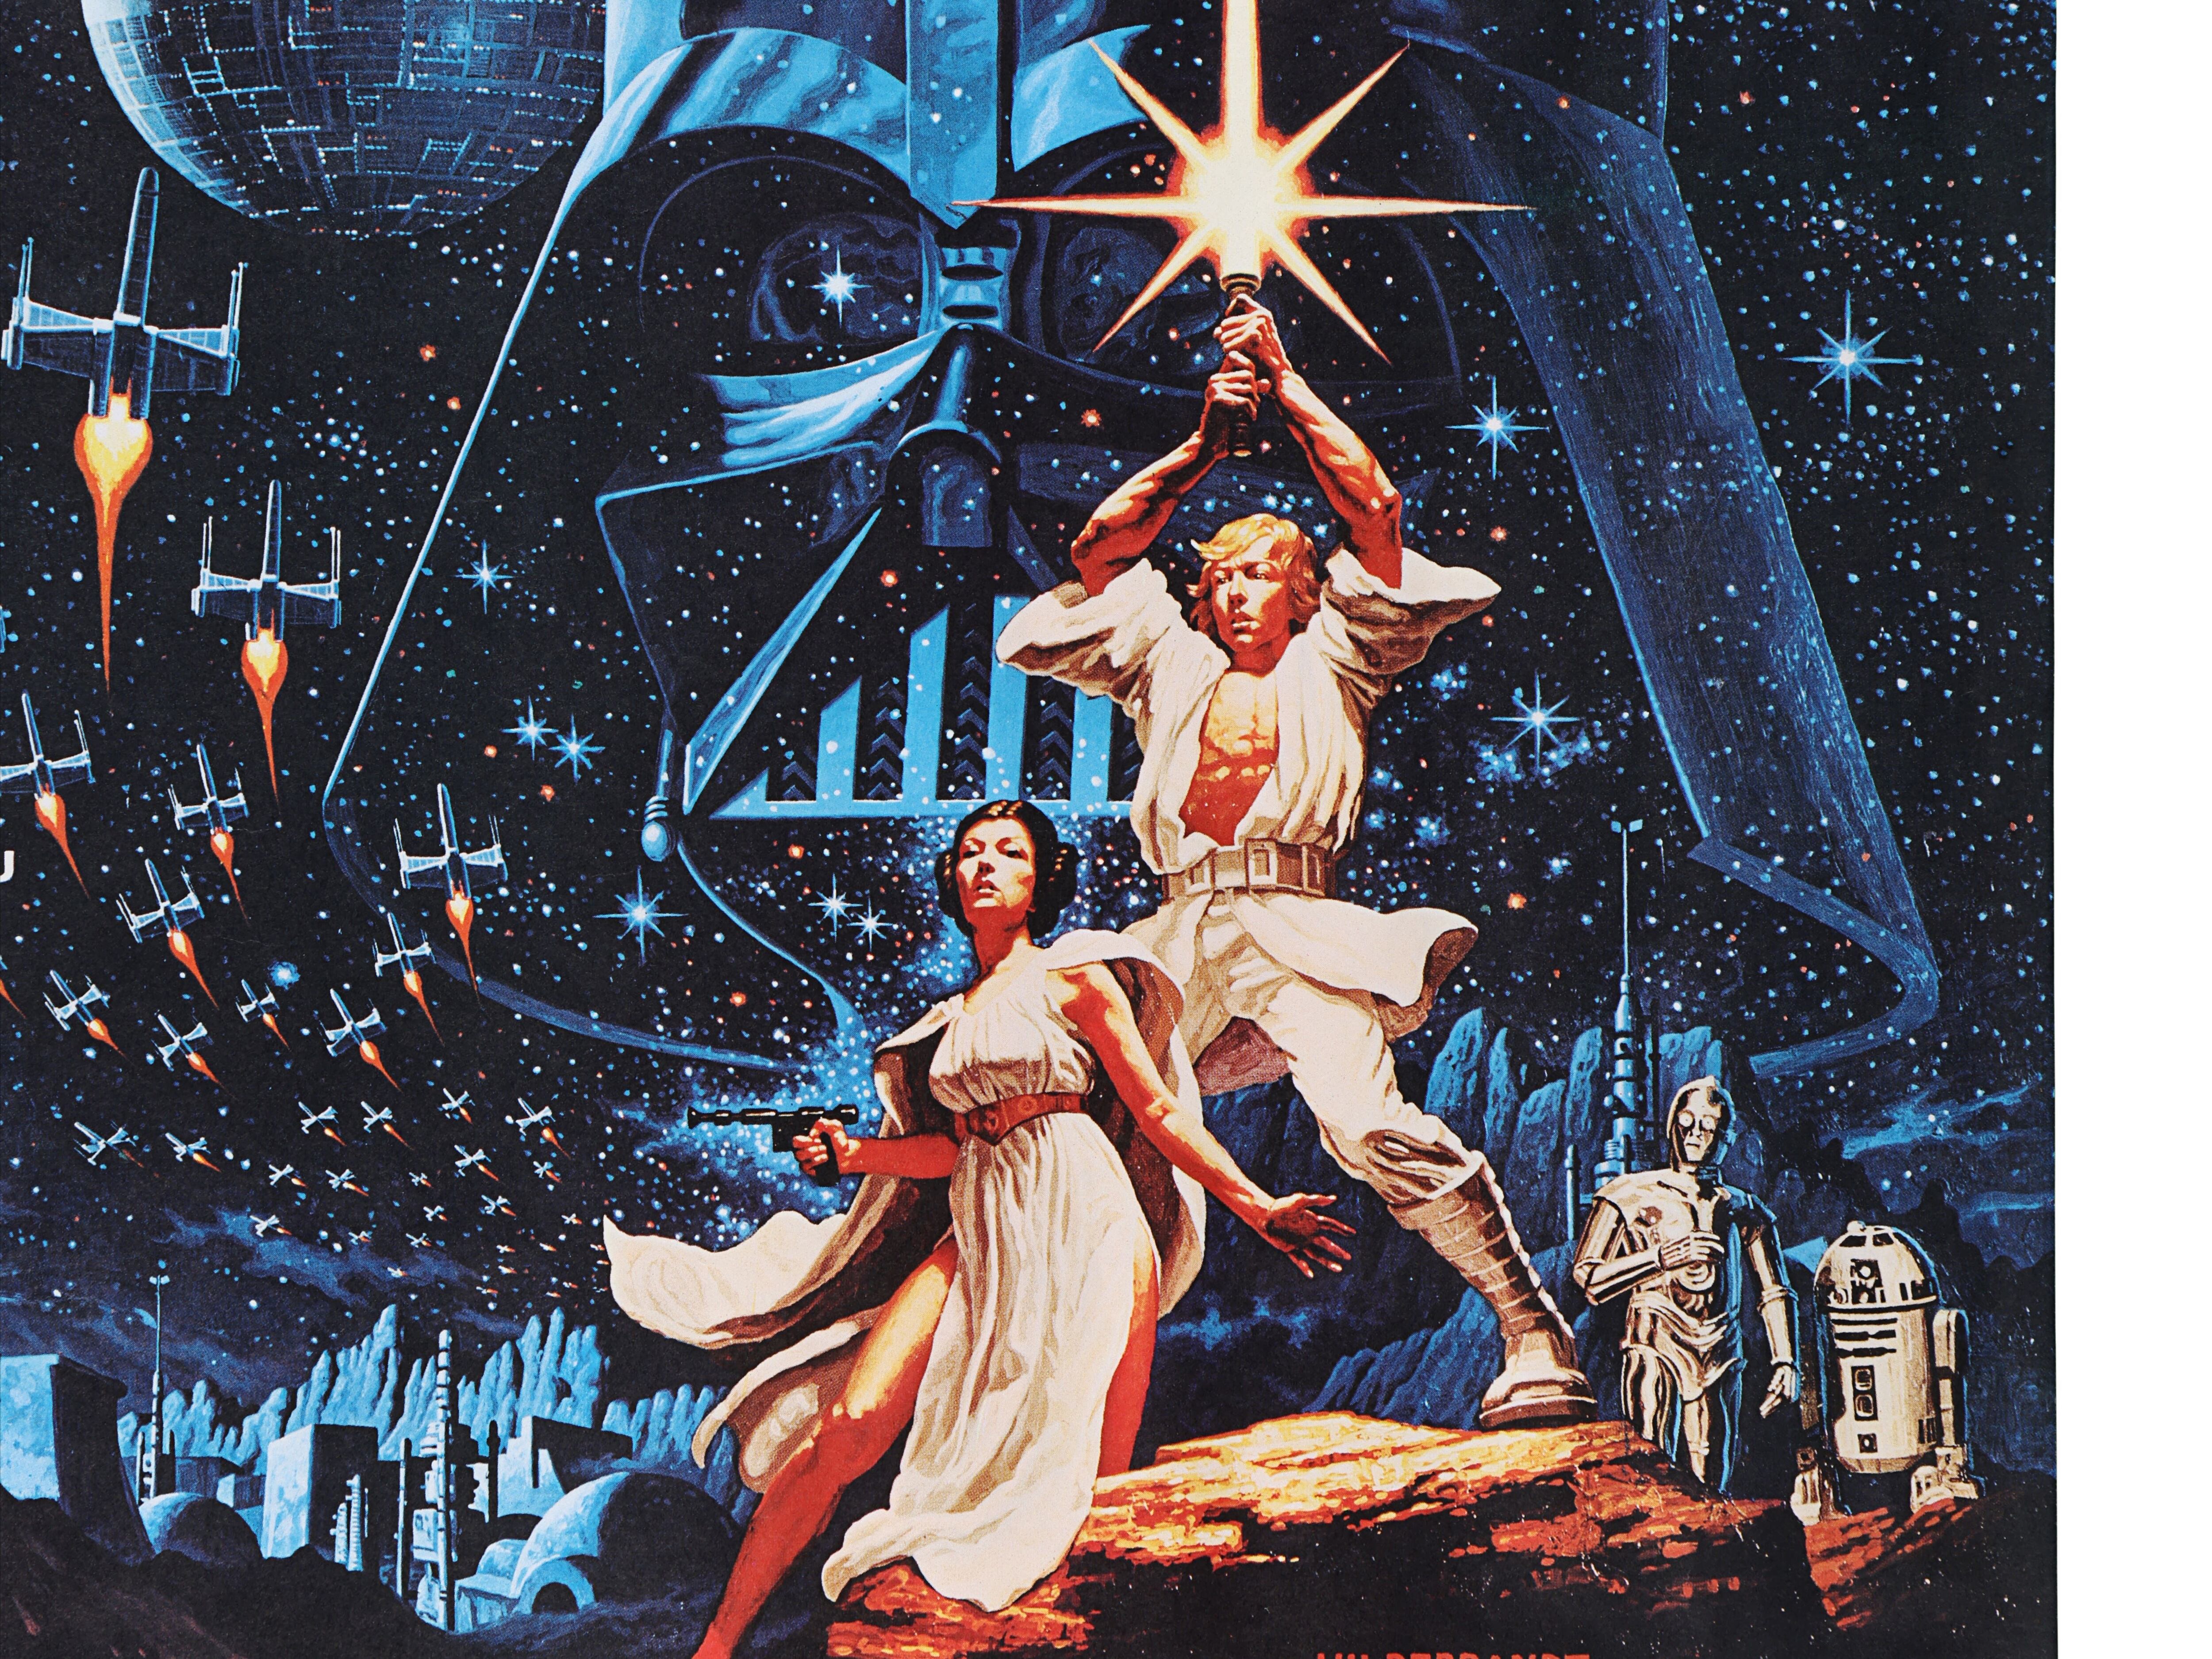 Rare Star Wars poster to go under the hammer in aid of Ukraine